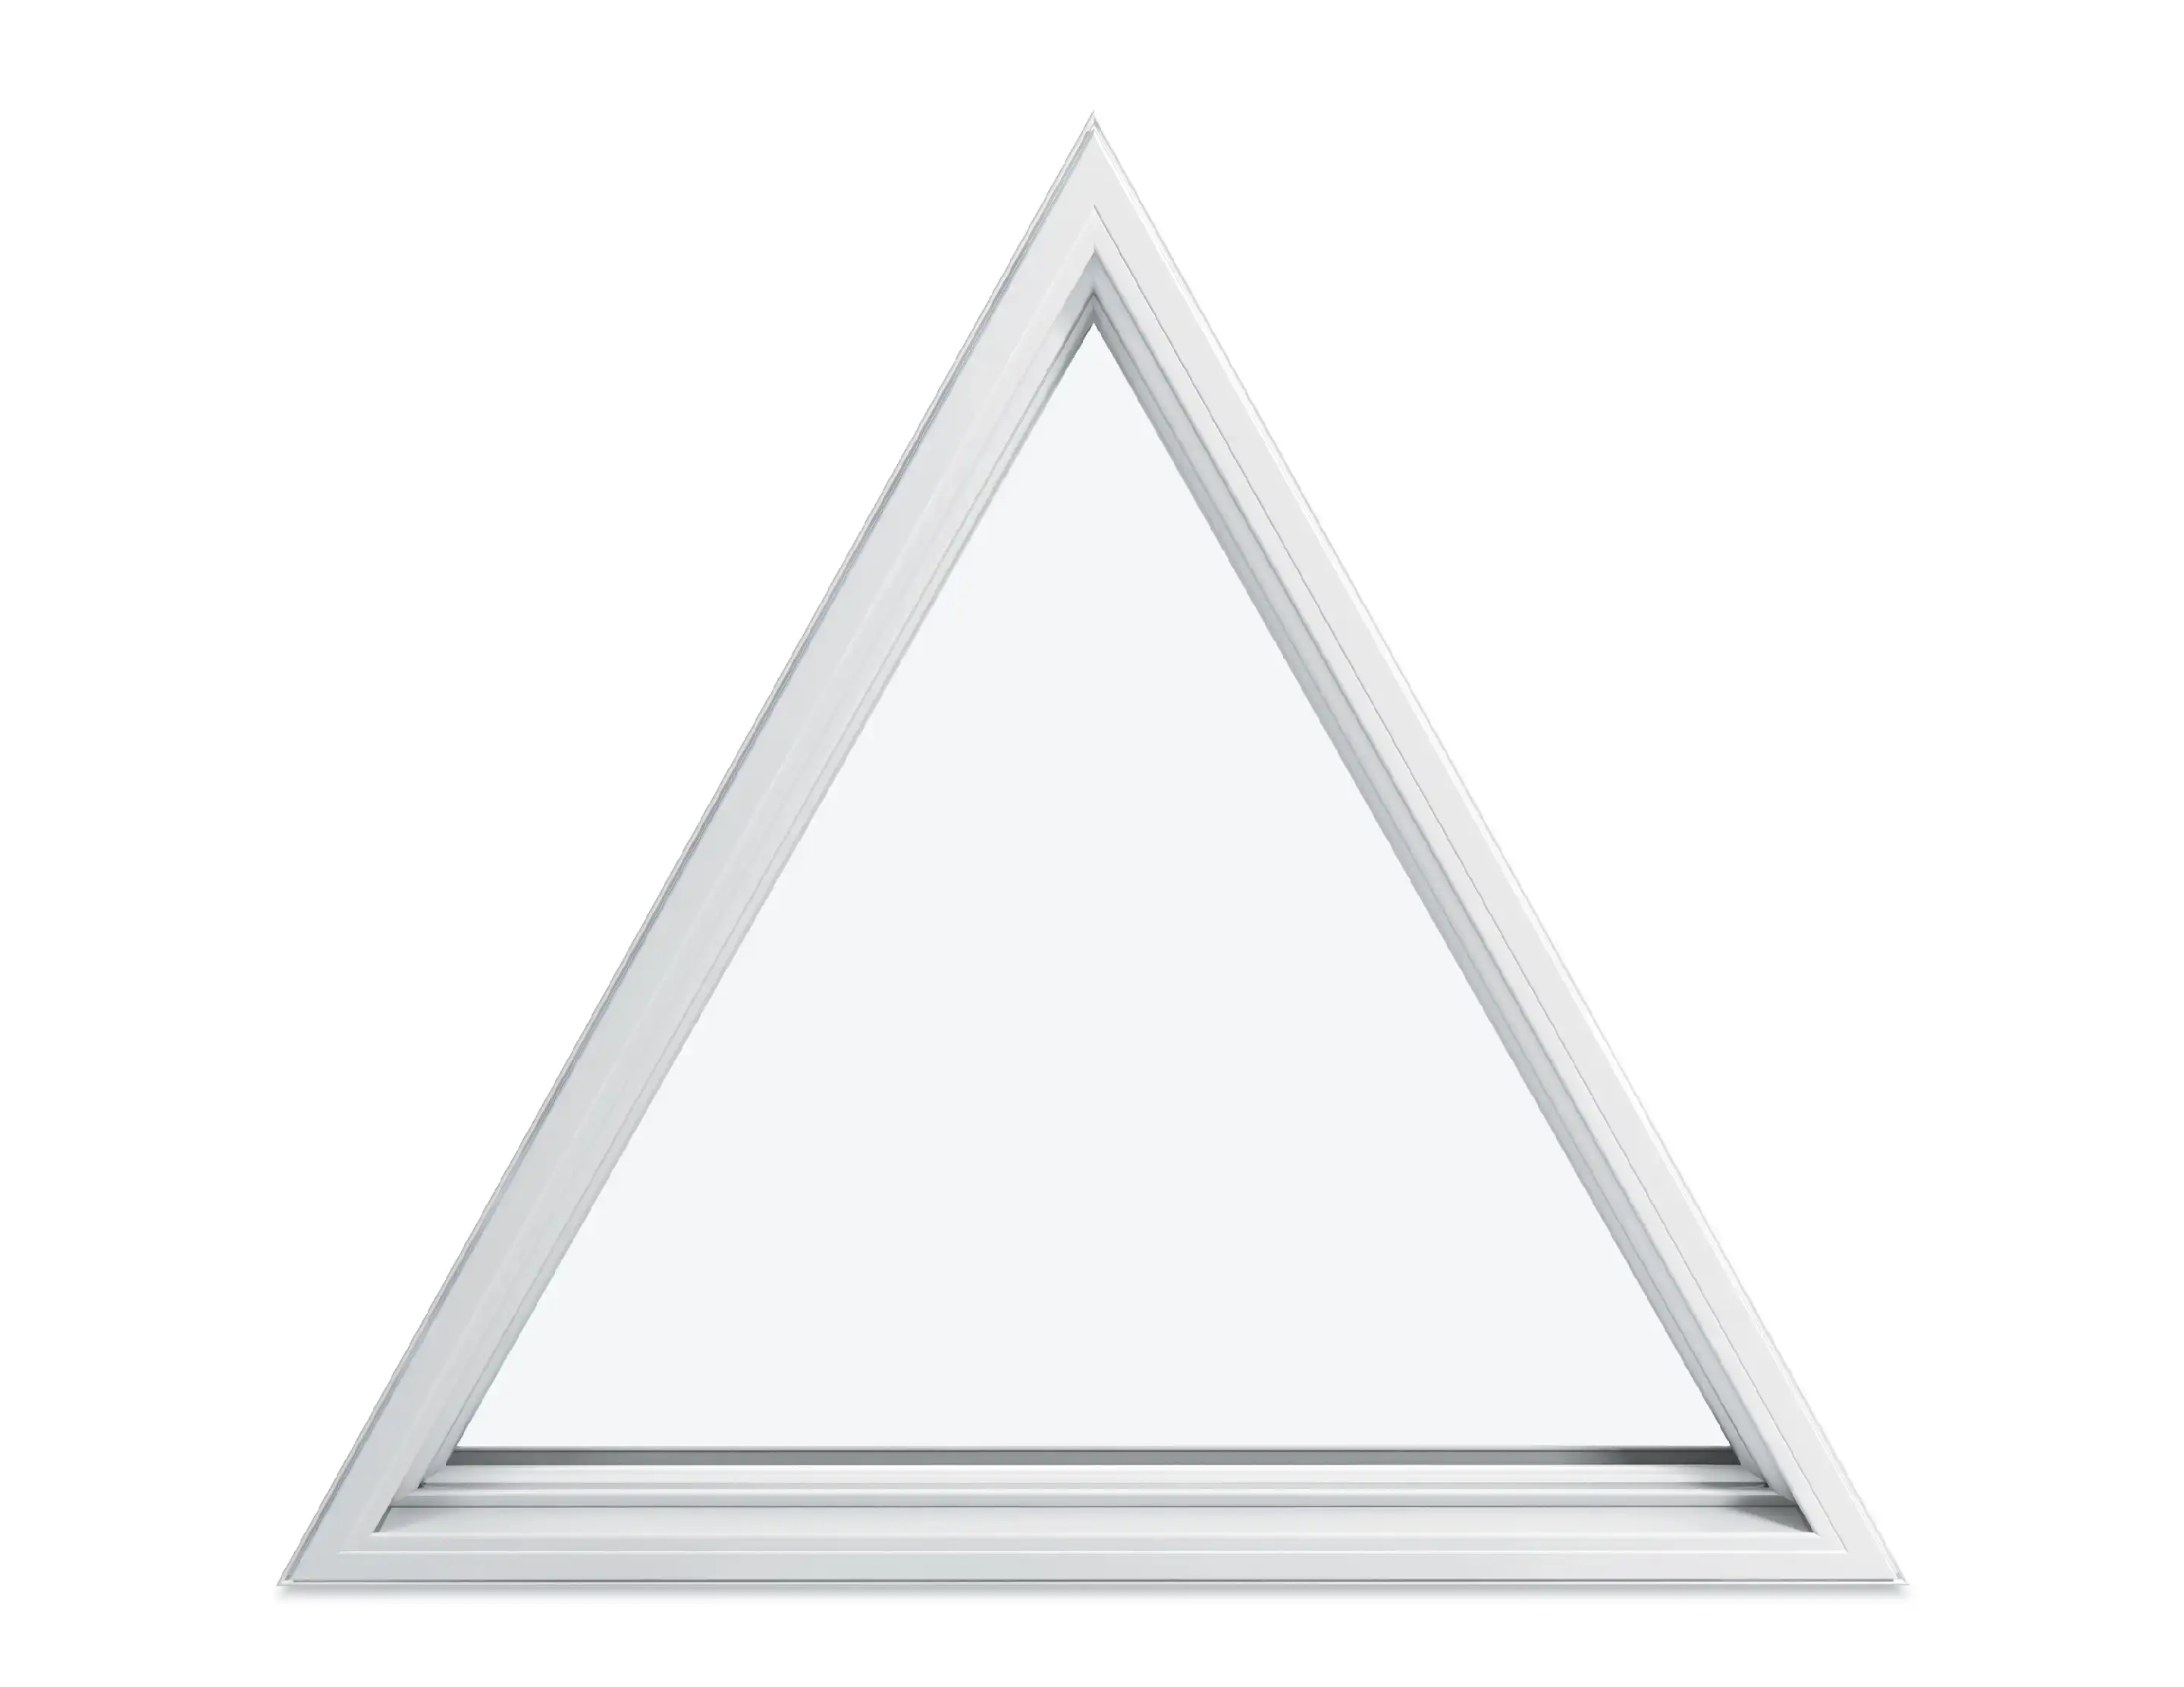 Image of a white Marvin Replacement Equilateral Triangle Picture window.